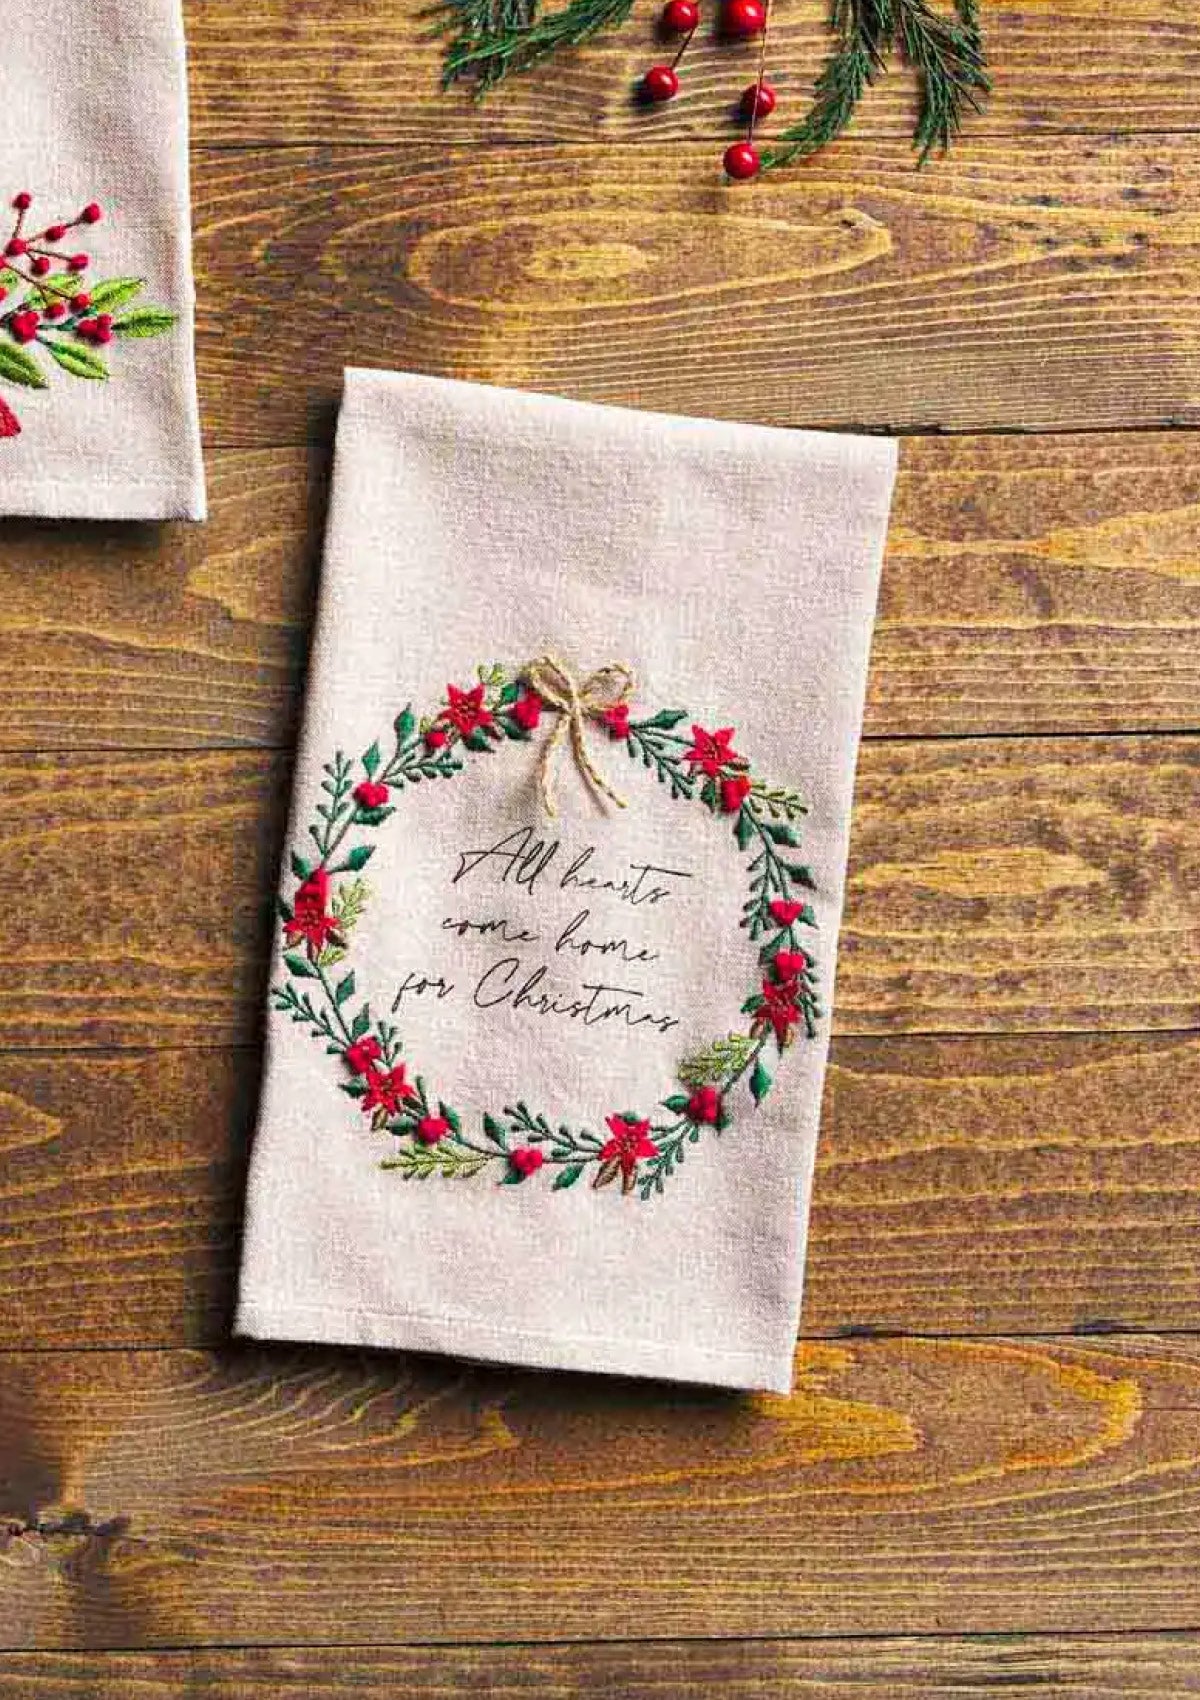 'All hearts come home for Christmas' Wreath Hand Towel